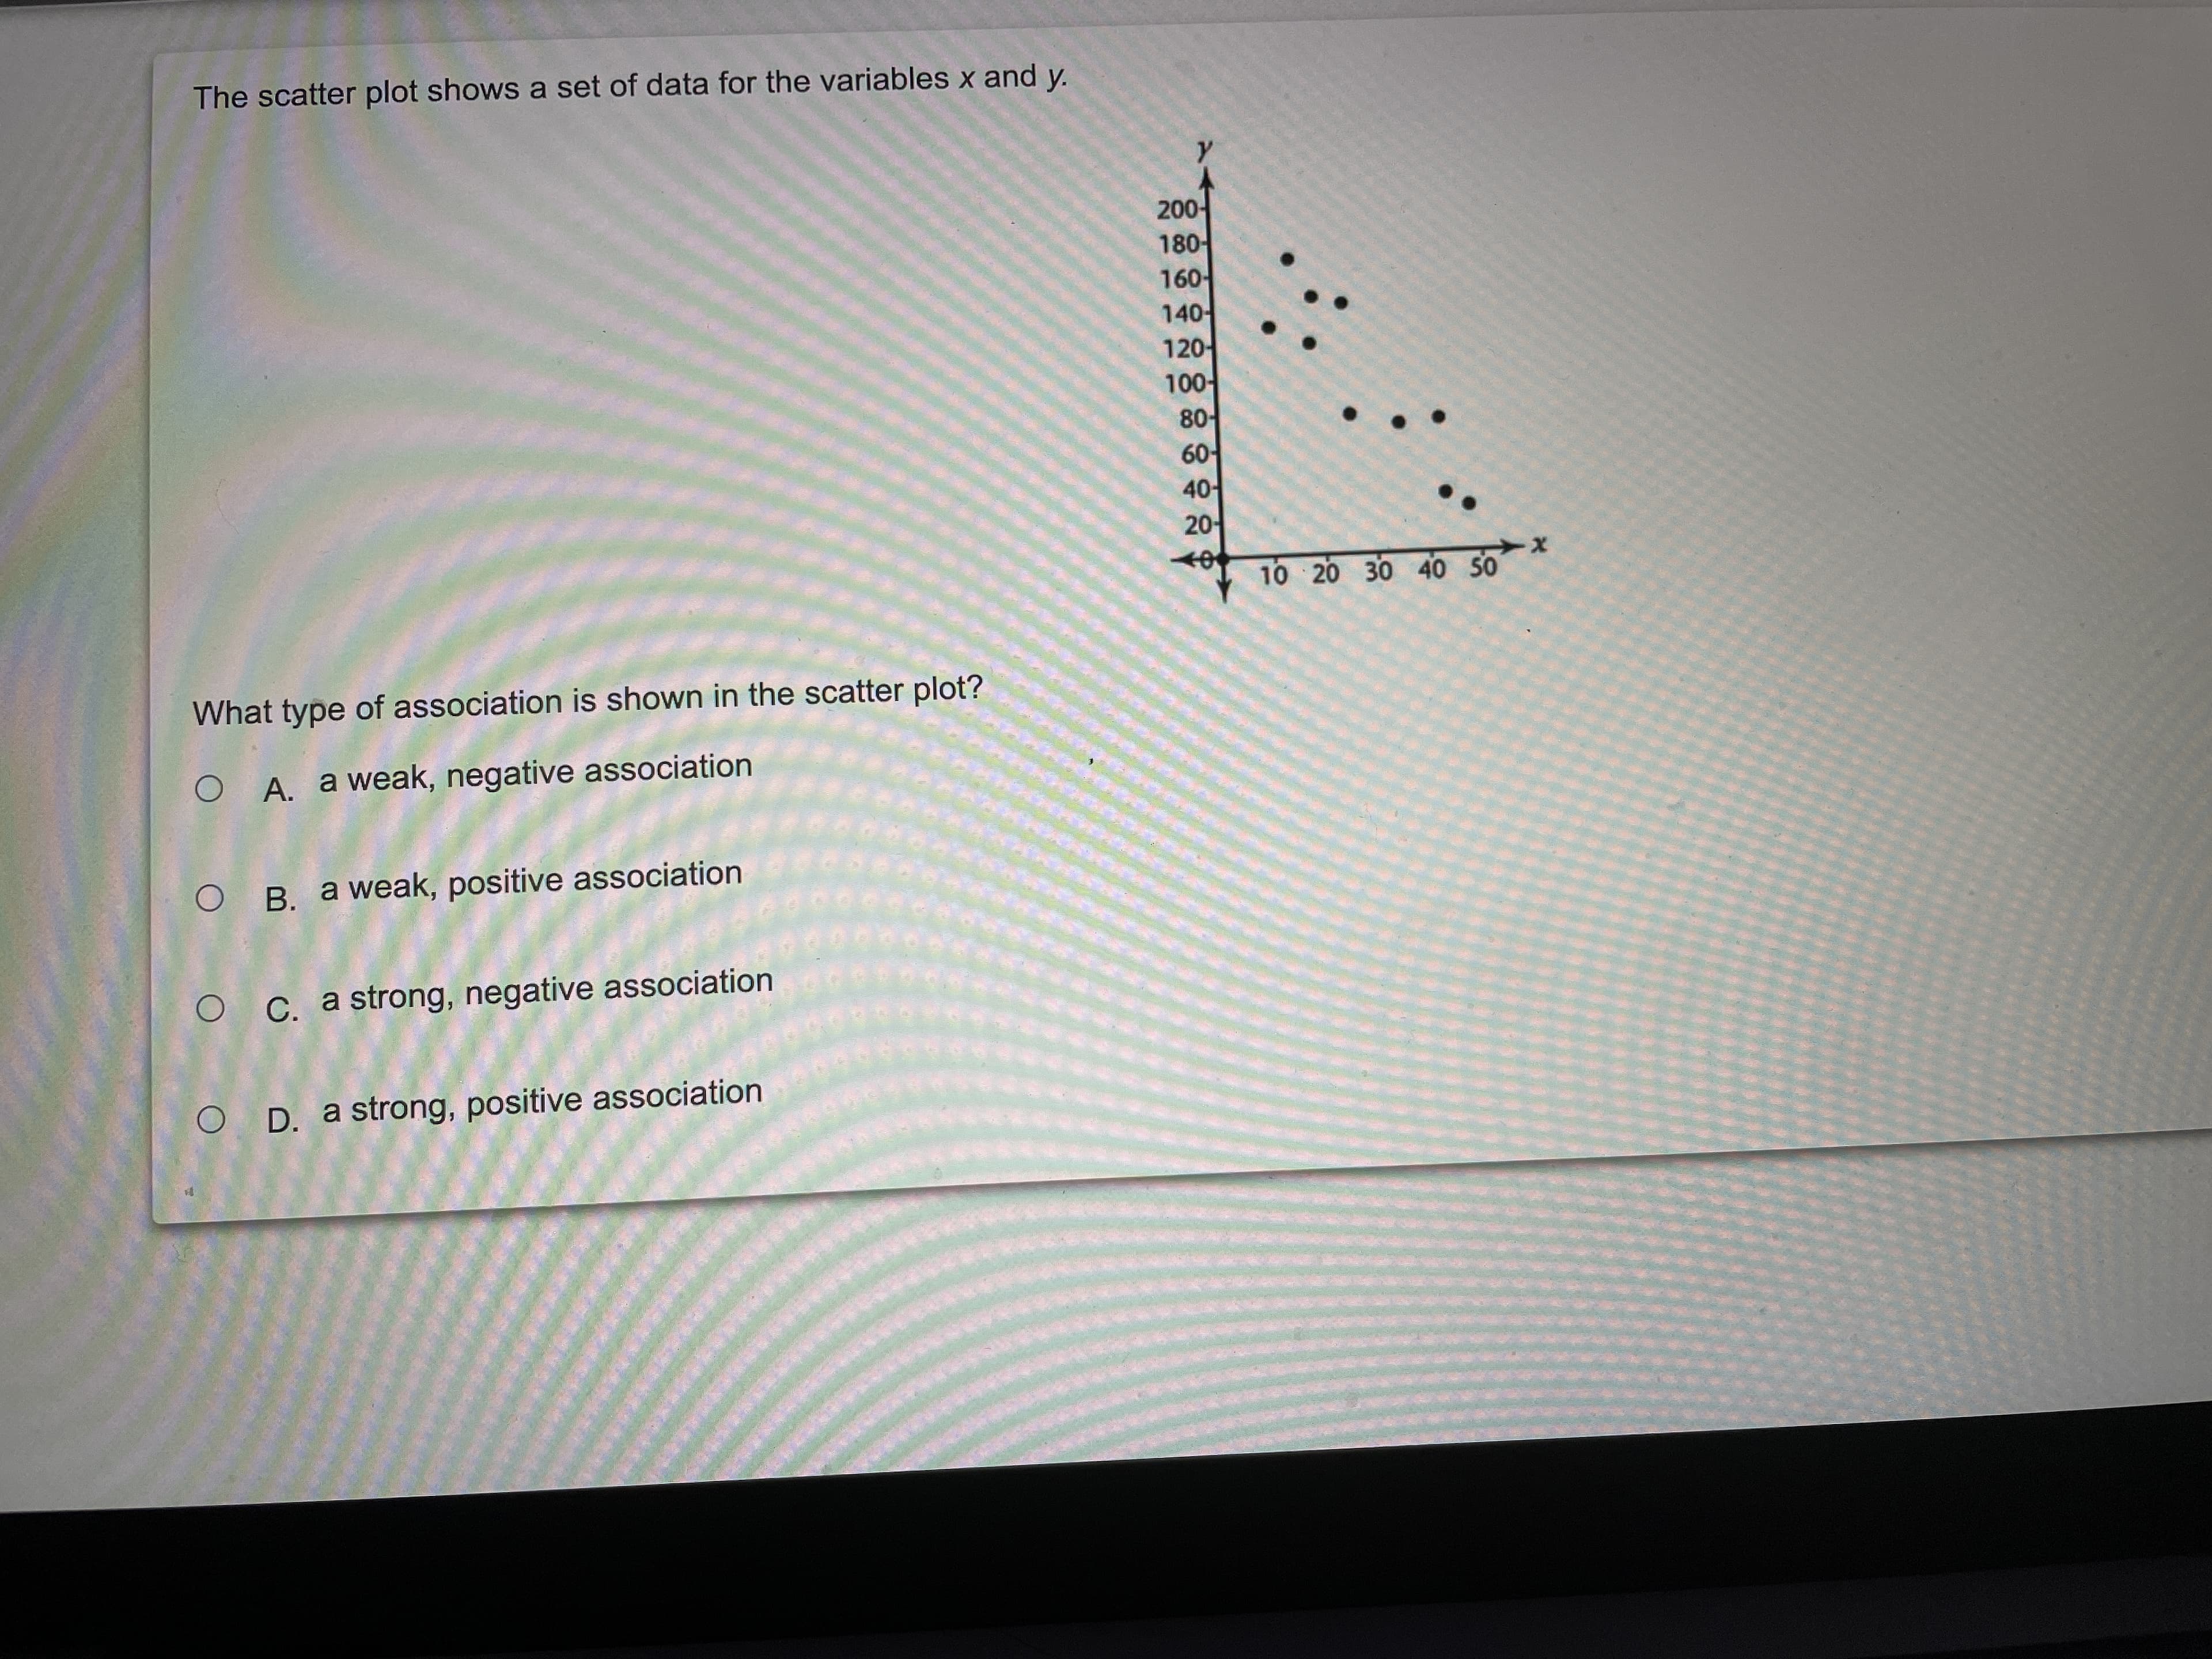 What type of association is shown in the scatter plot?
